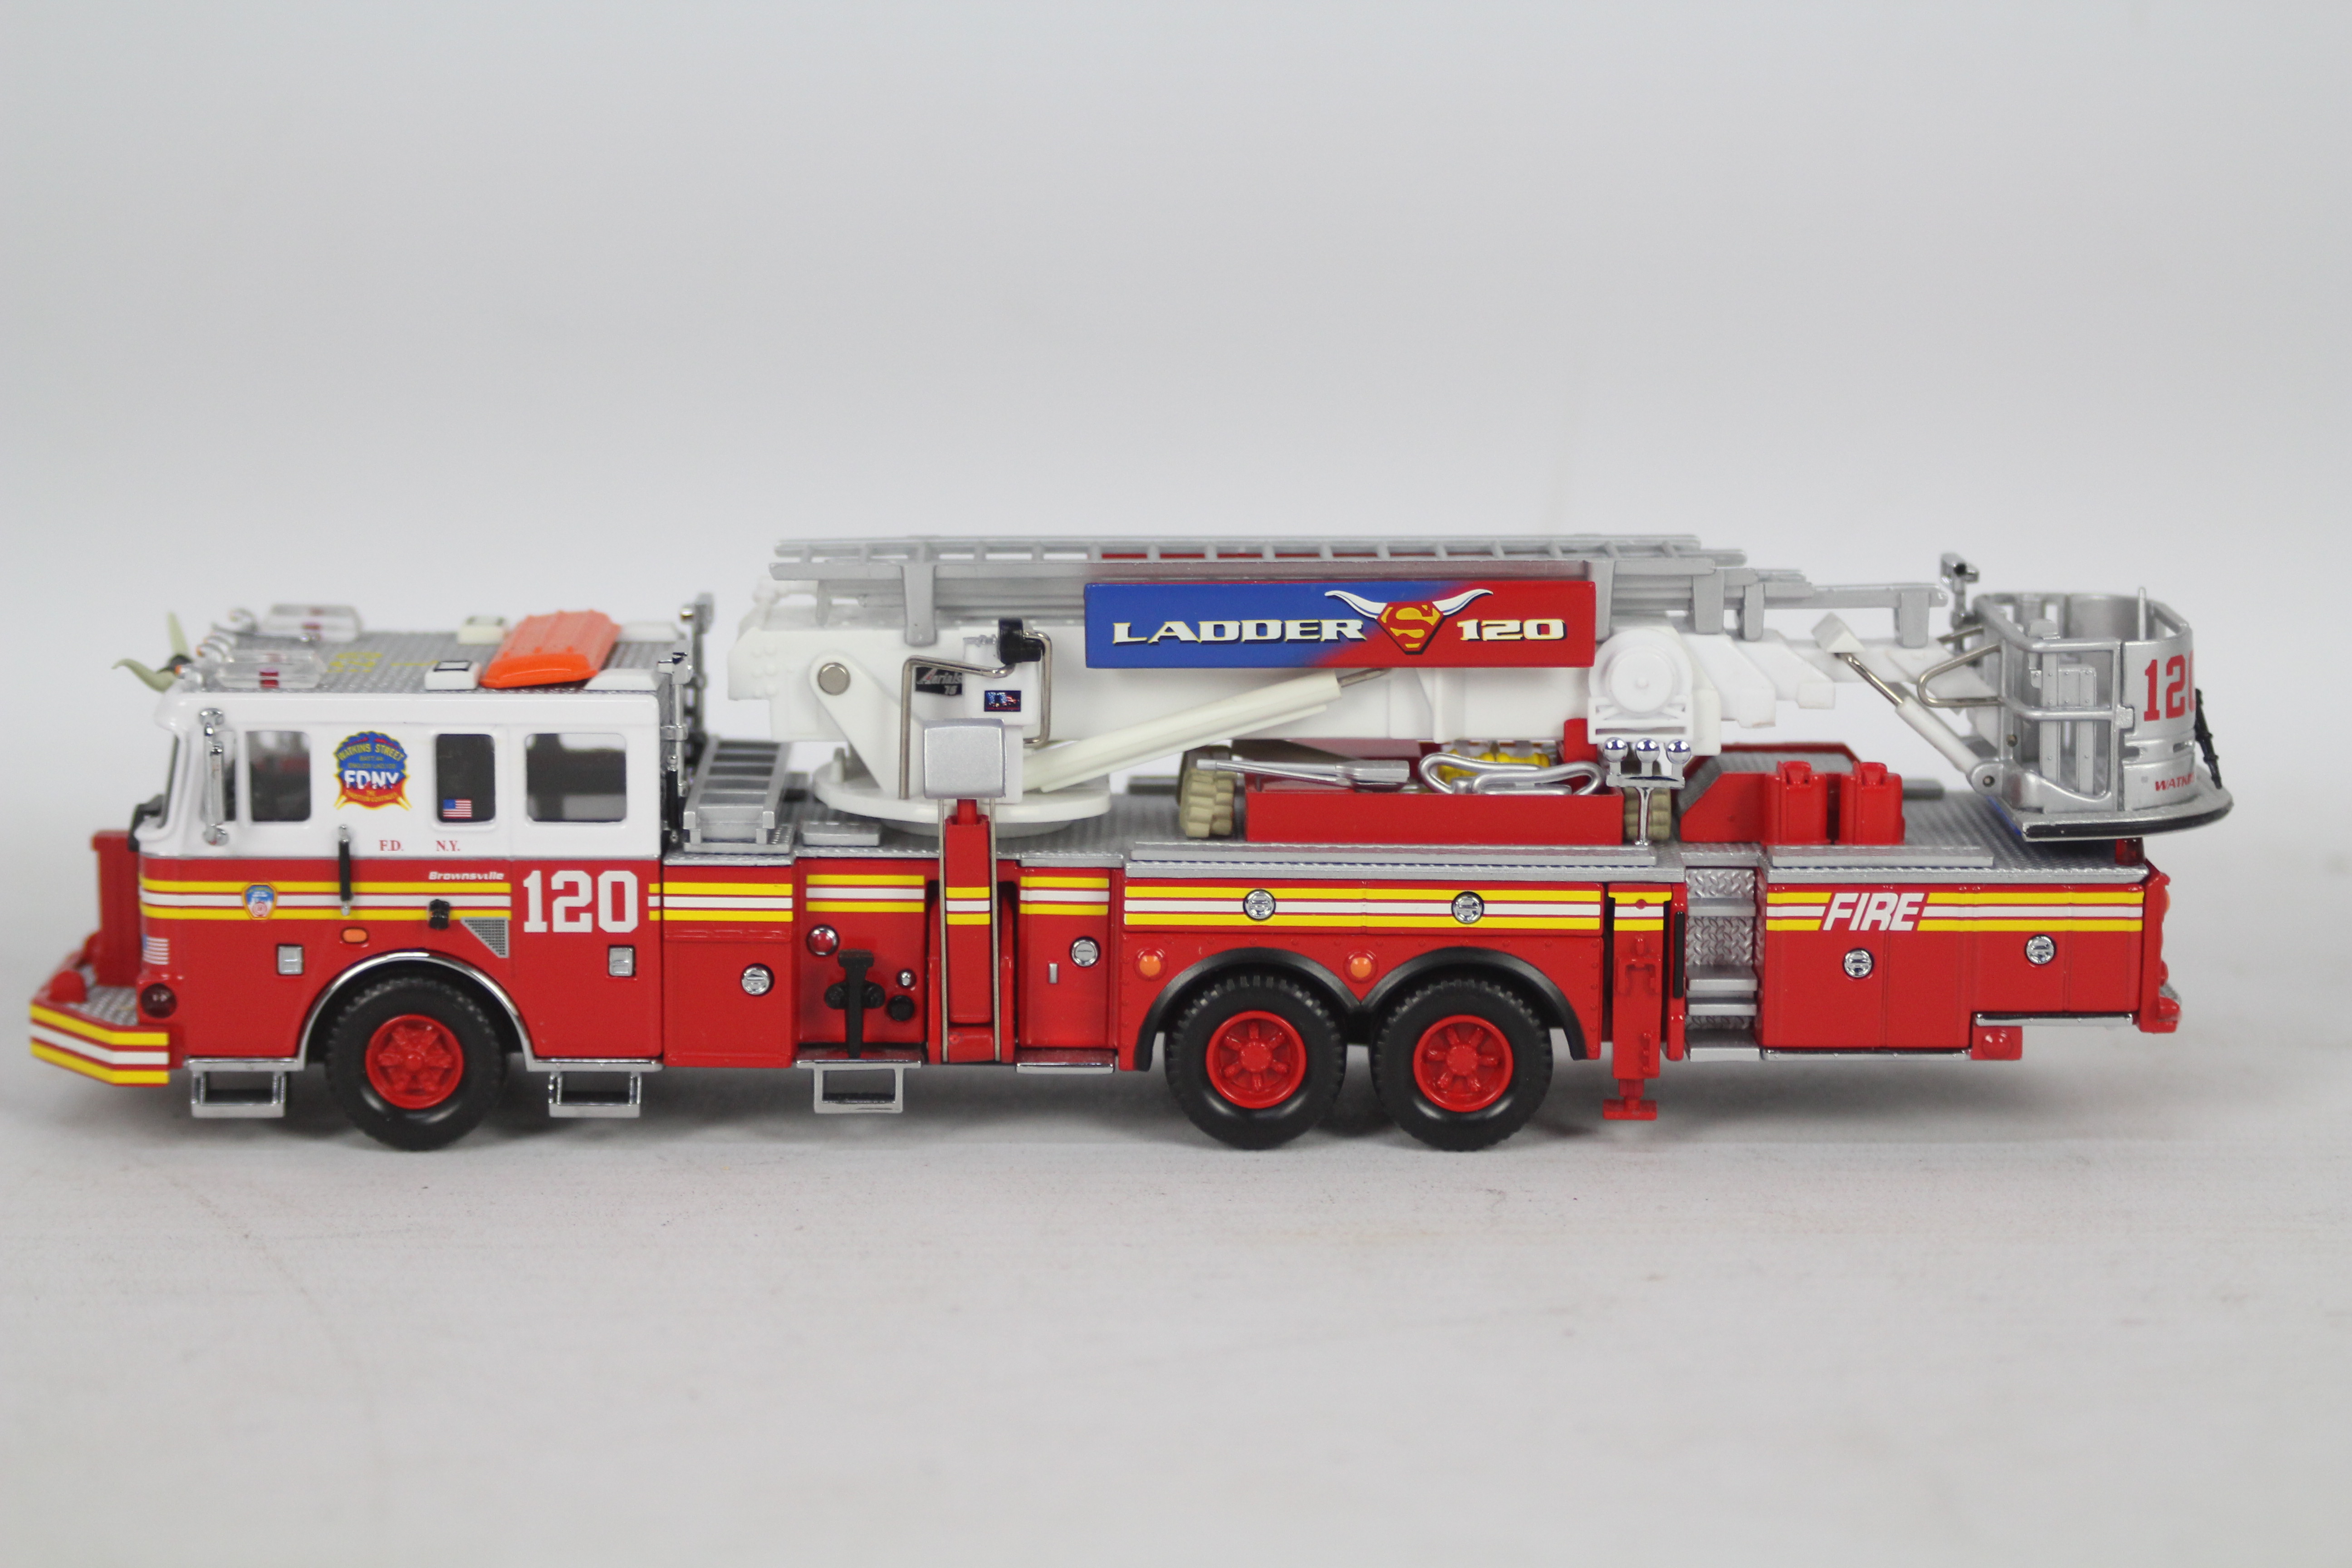 Code 3 Collectibles - An unboxed Seagrave Aerialscope Ladder 120 in FDNY livery in 1:64 scale # - Image 2 of 5